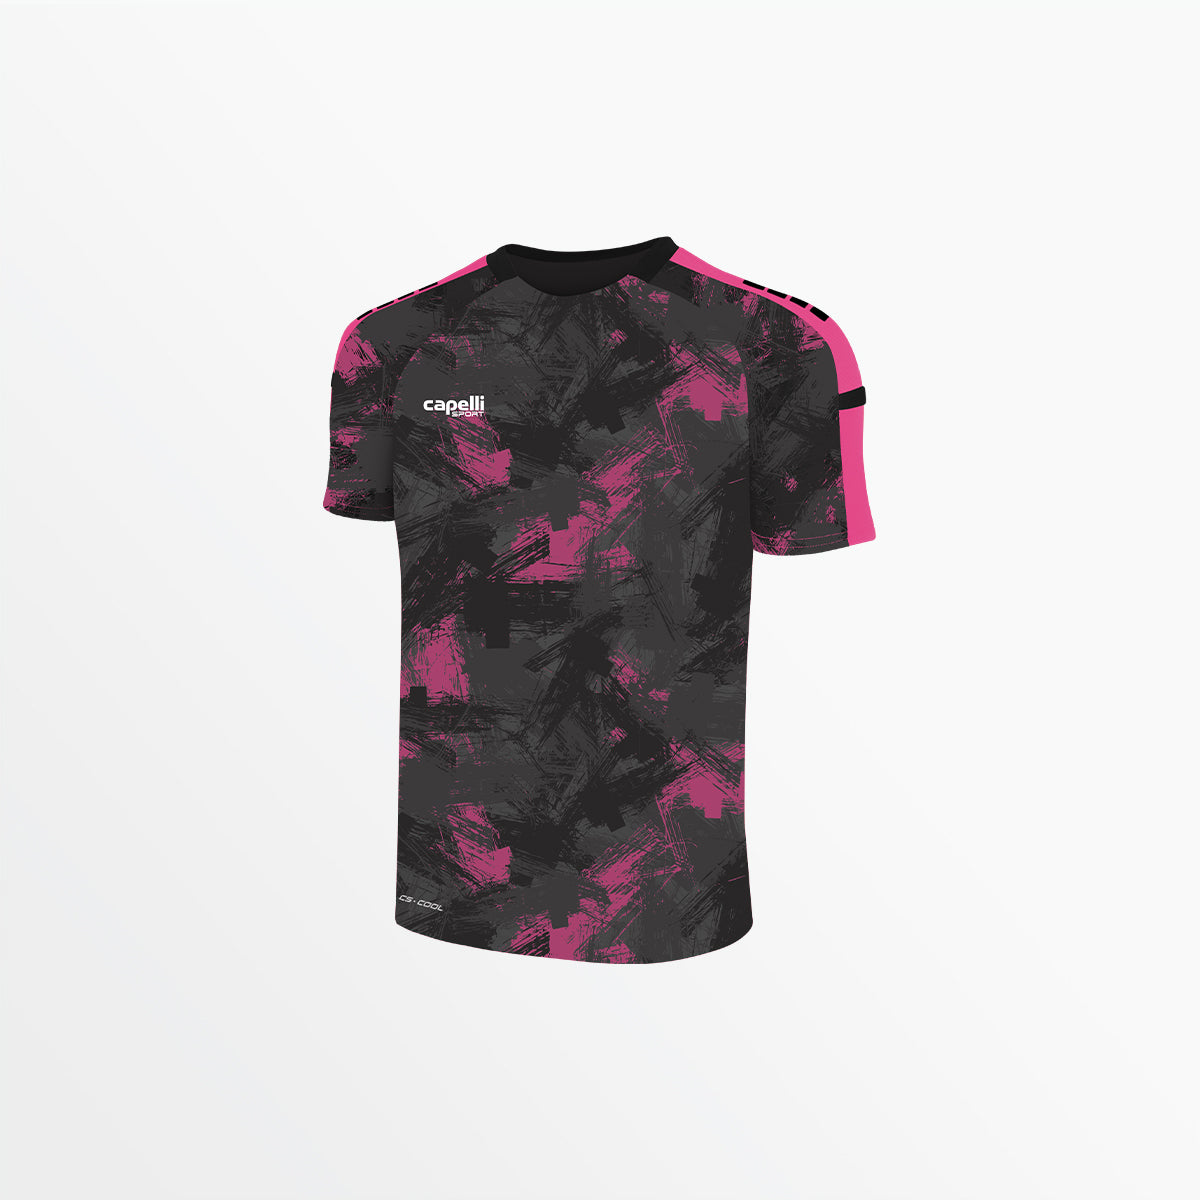 YOUTH PITCH II CAMO STROKES JERSEY